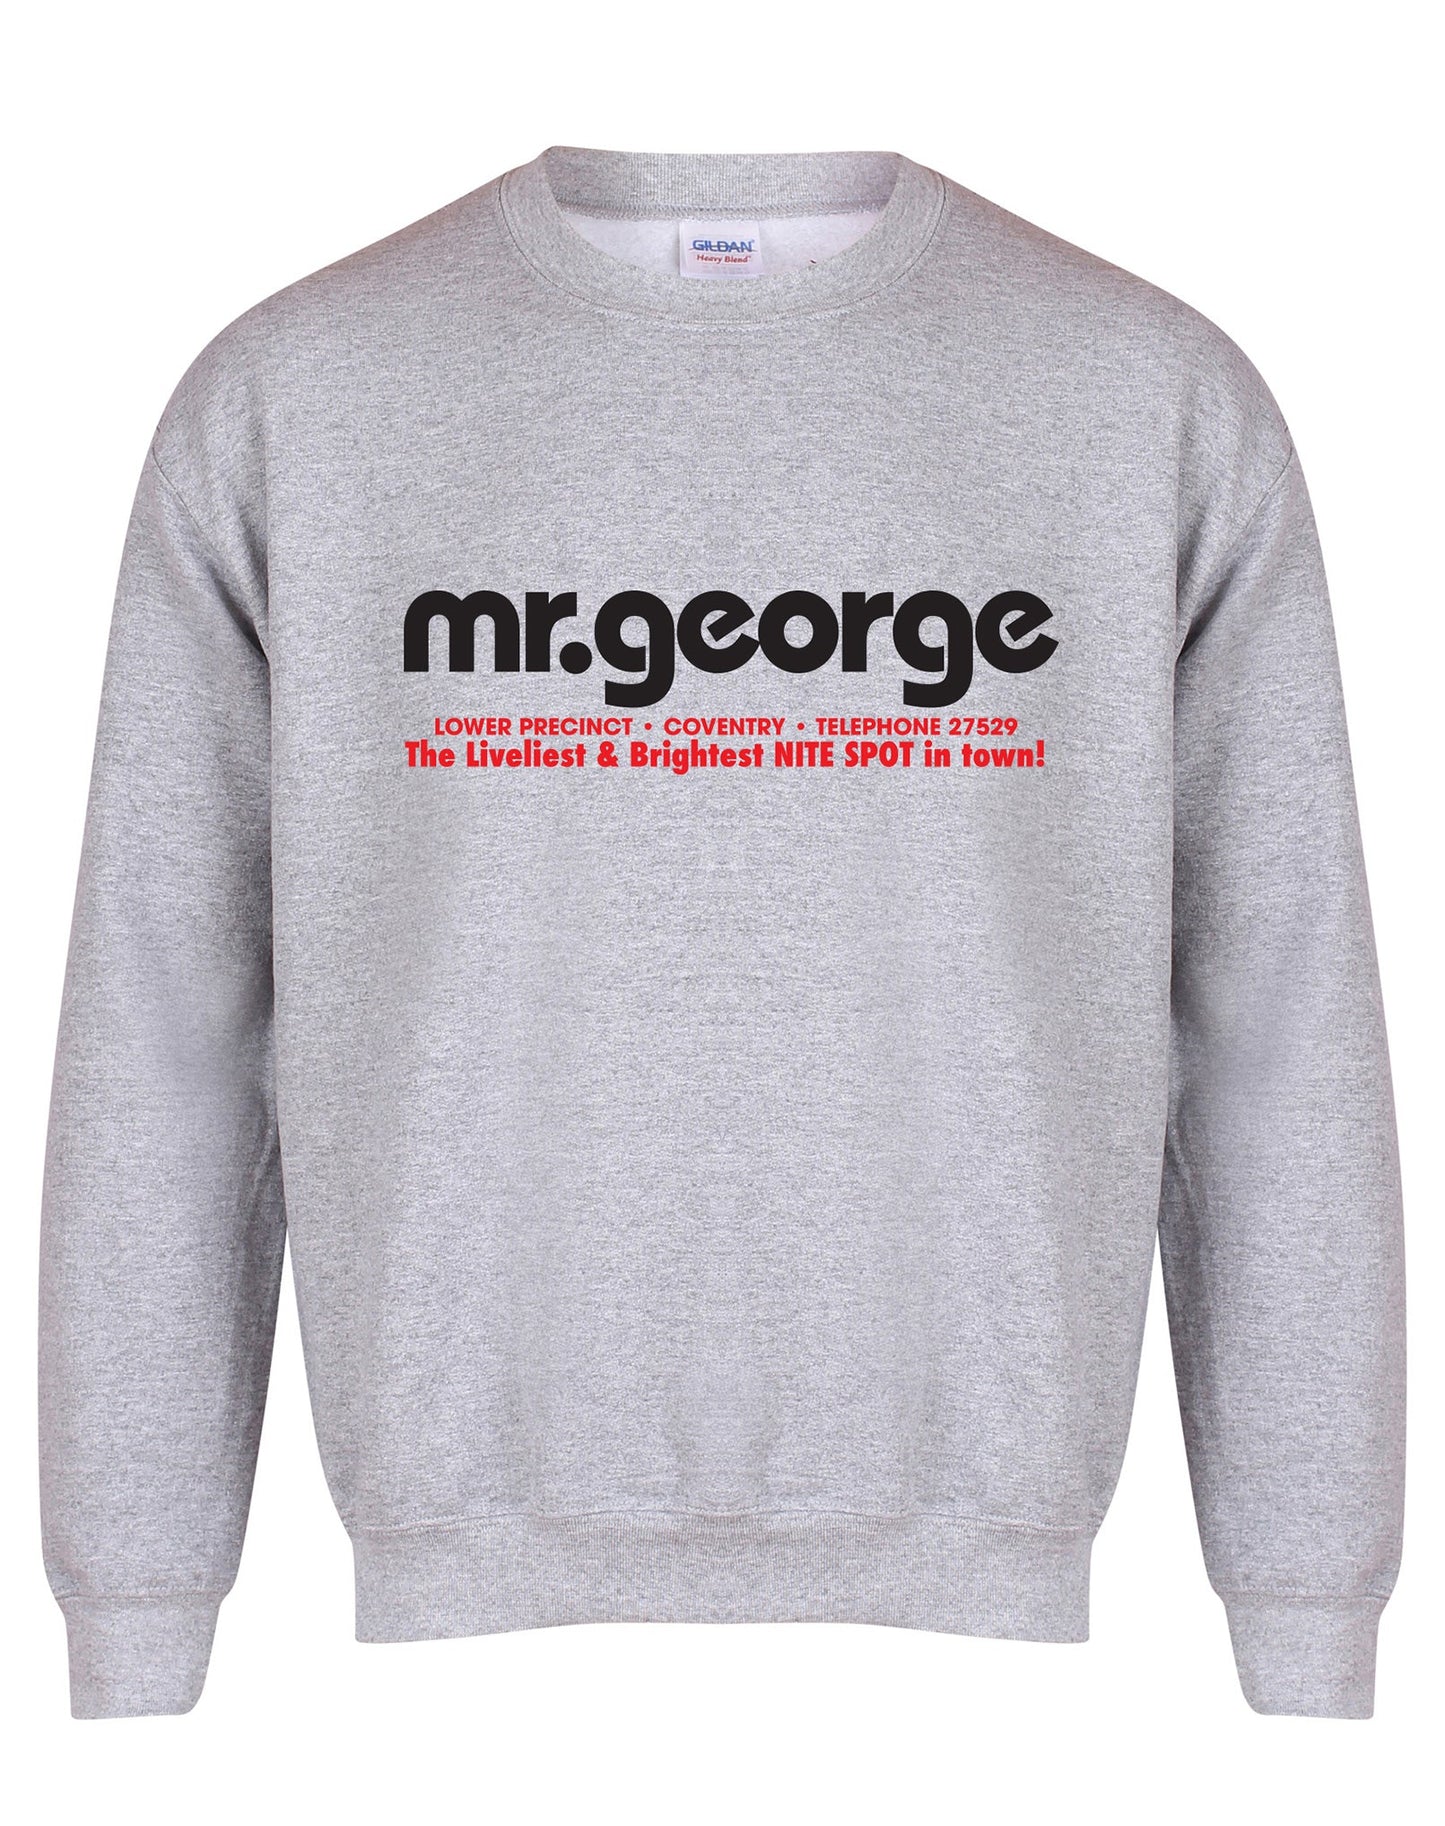 Mr George unisex sweatshirt - various colours - Dirty Stop Outs